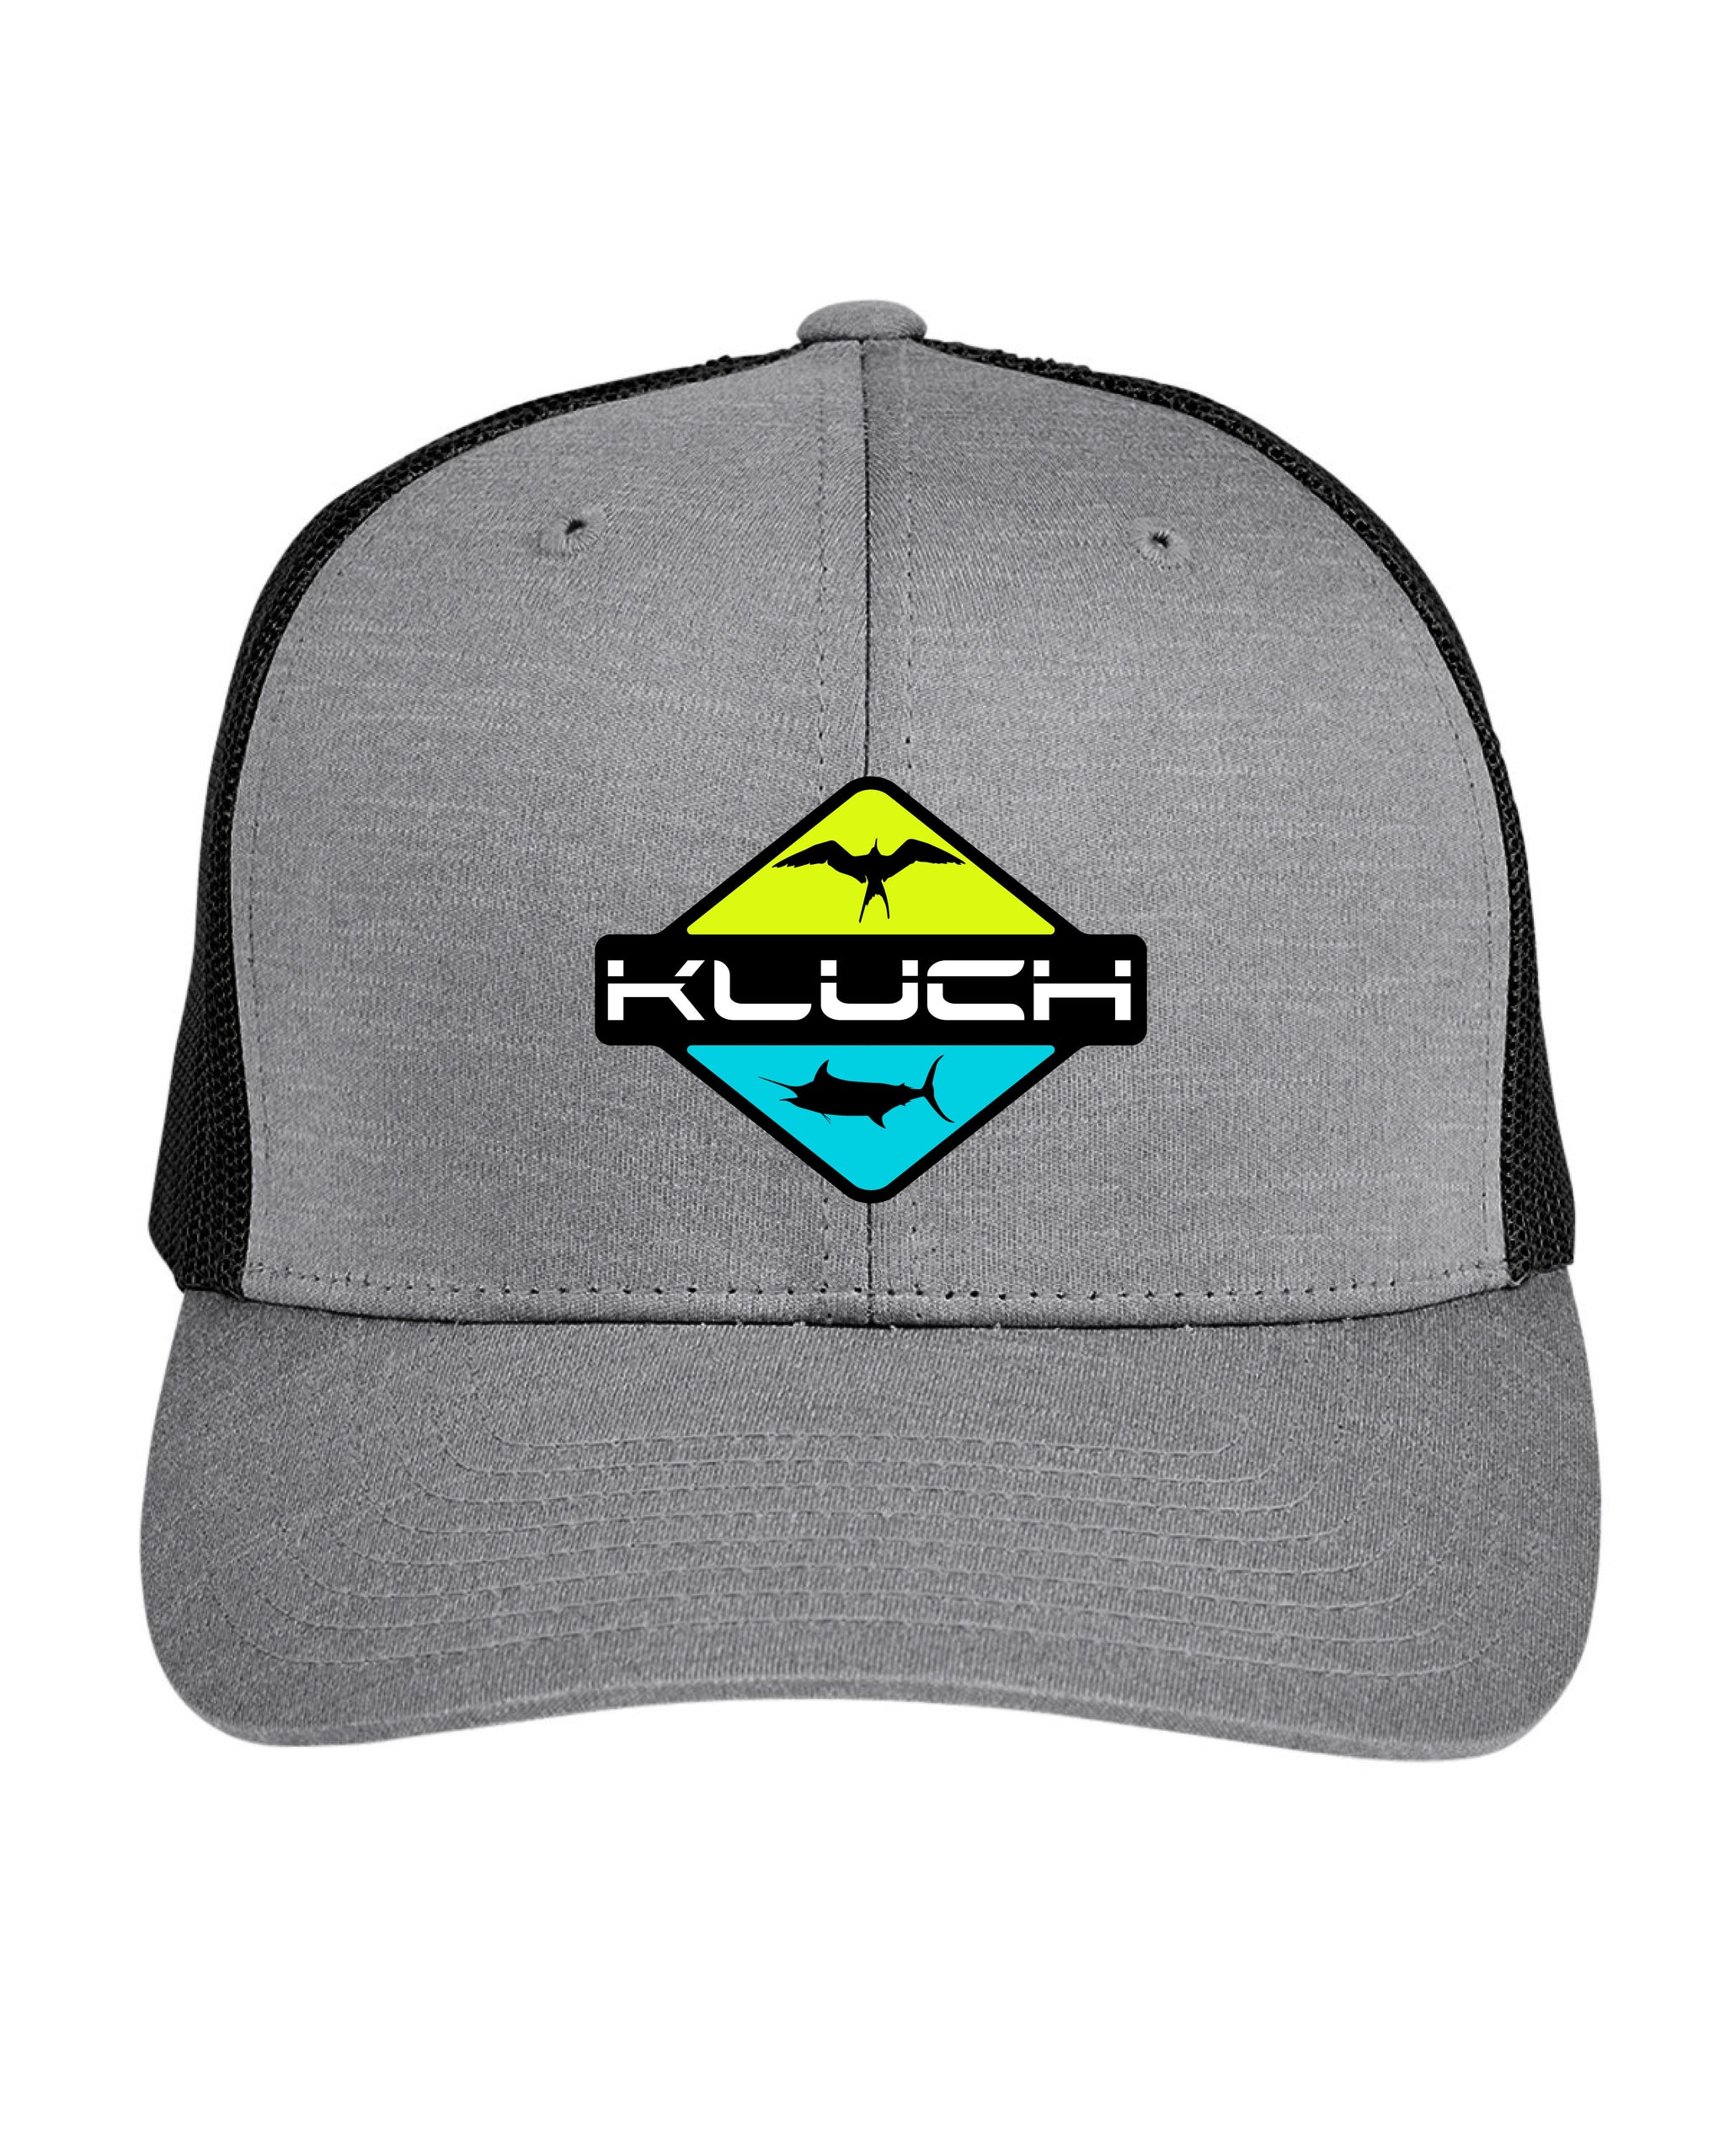 Kluch Apparel - Kluch Hats Adjustable